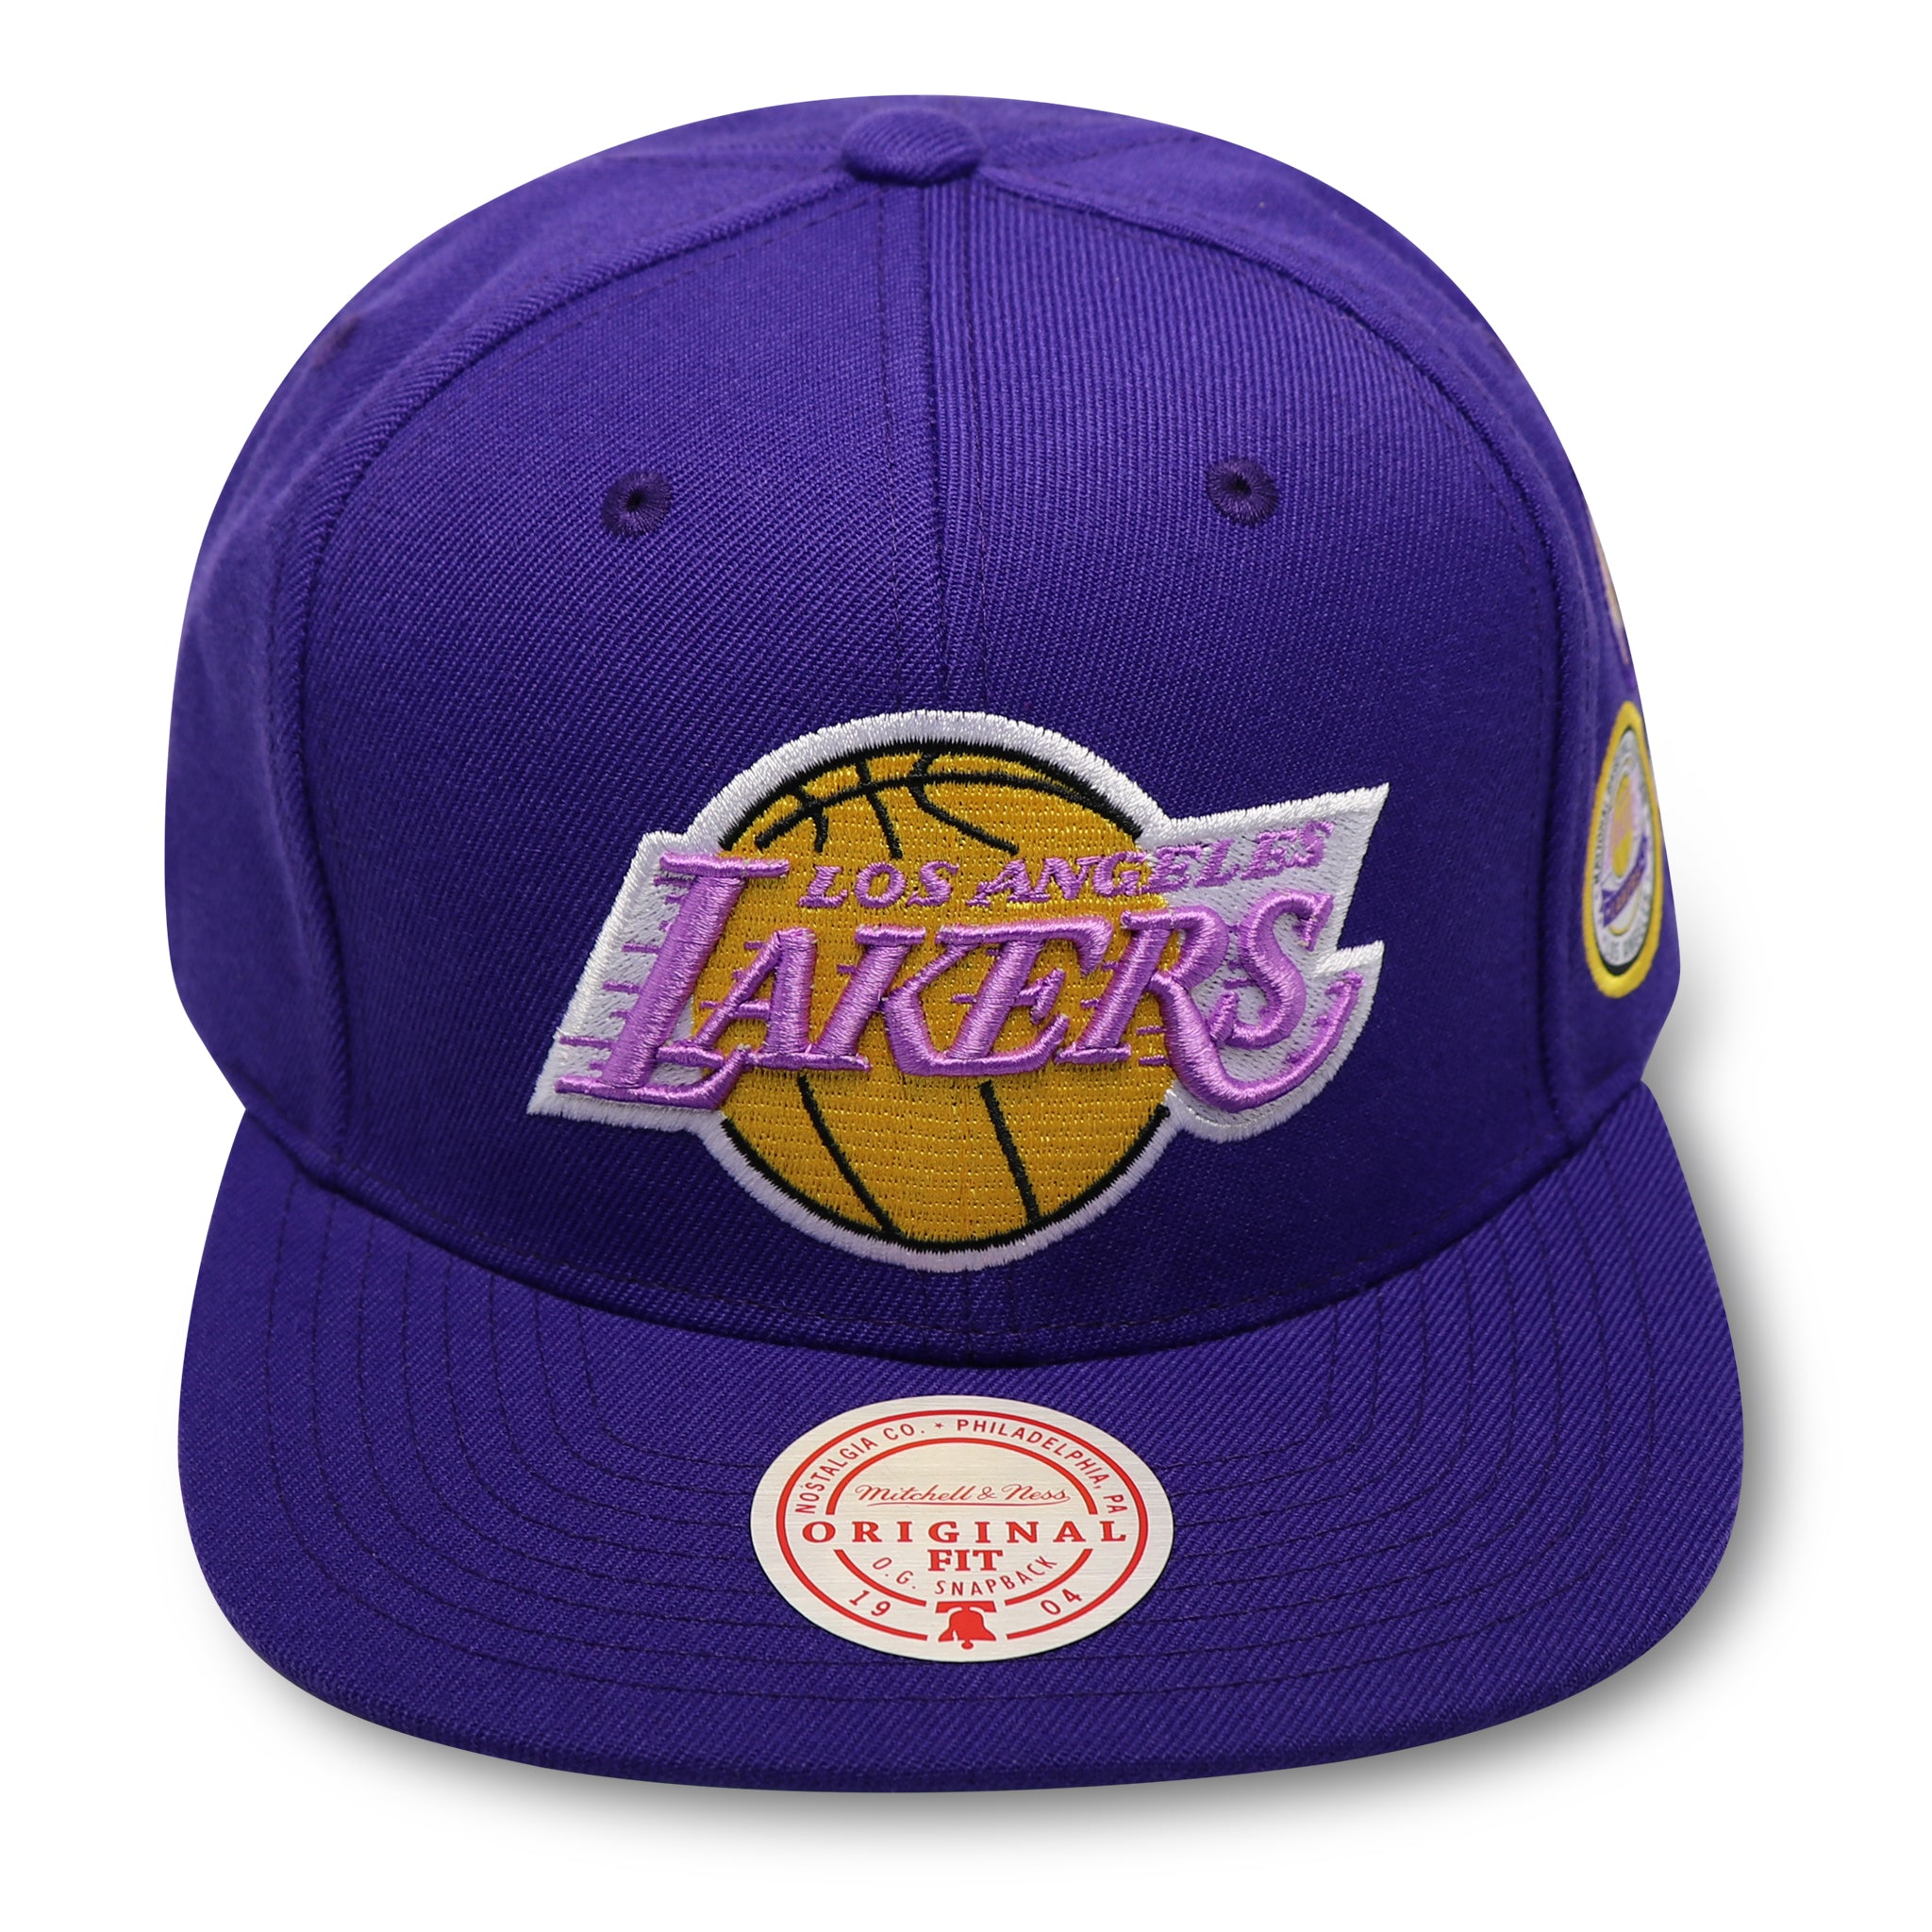 LOS ANGELES LAKERS (PURPLE) "FINALS PATCH" MITCHELL & NESS (SKY BLUE BOTTOM)